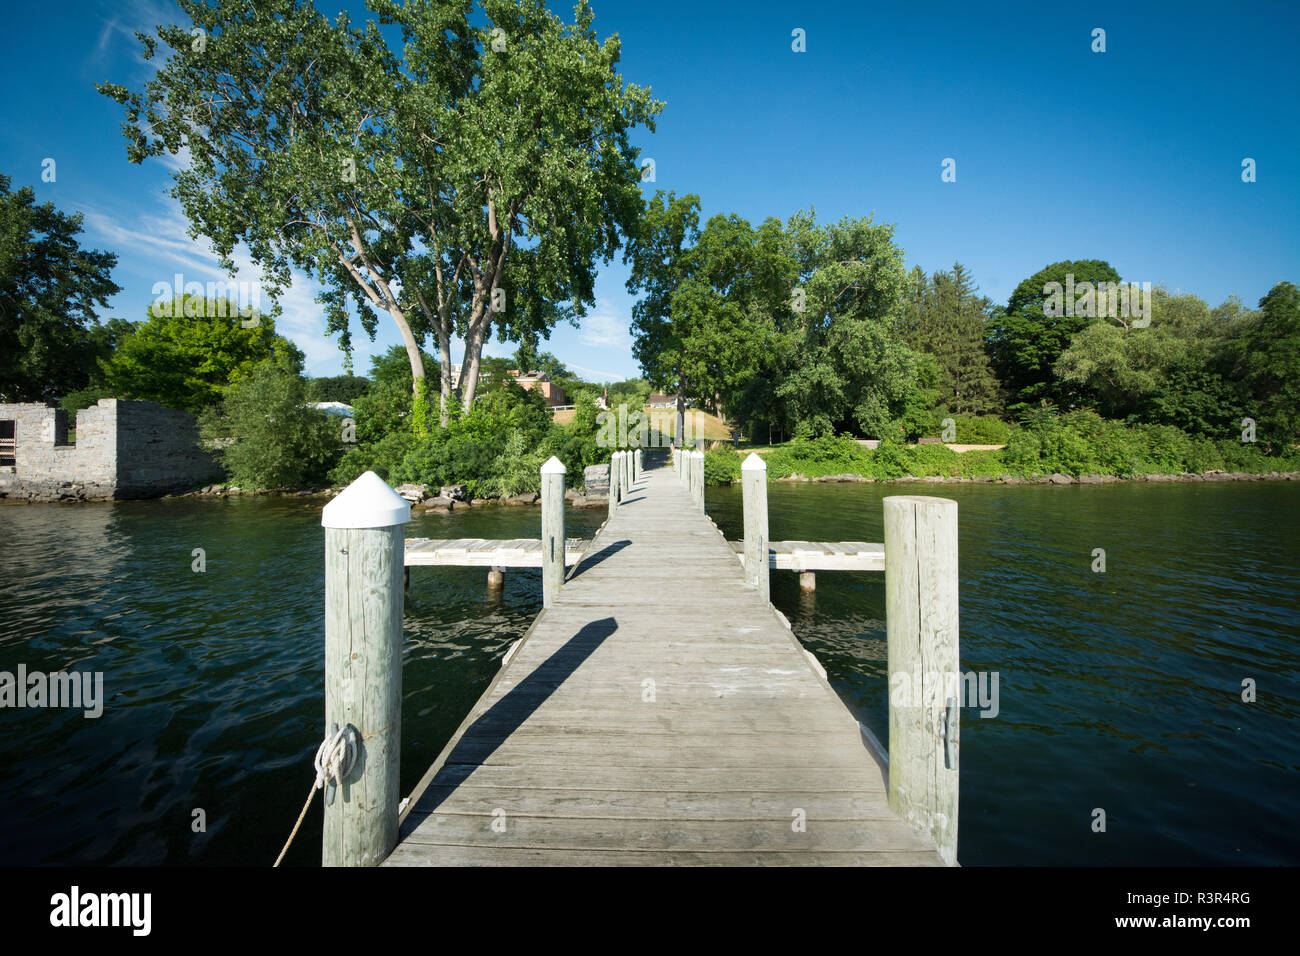 A wooden dock on Cayuga Lake in the Finger Lakes region of New York, USA. Stock Photo